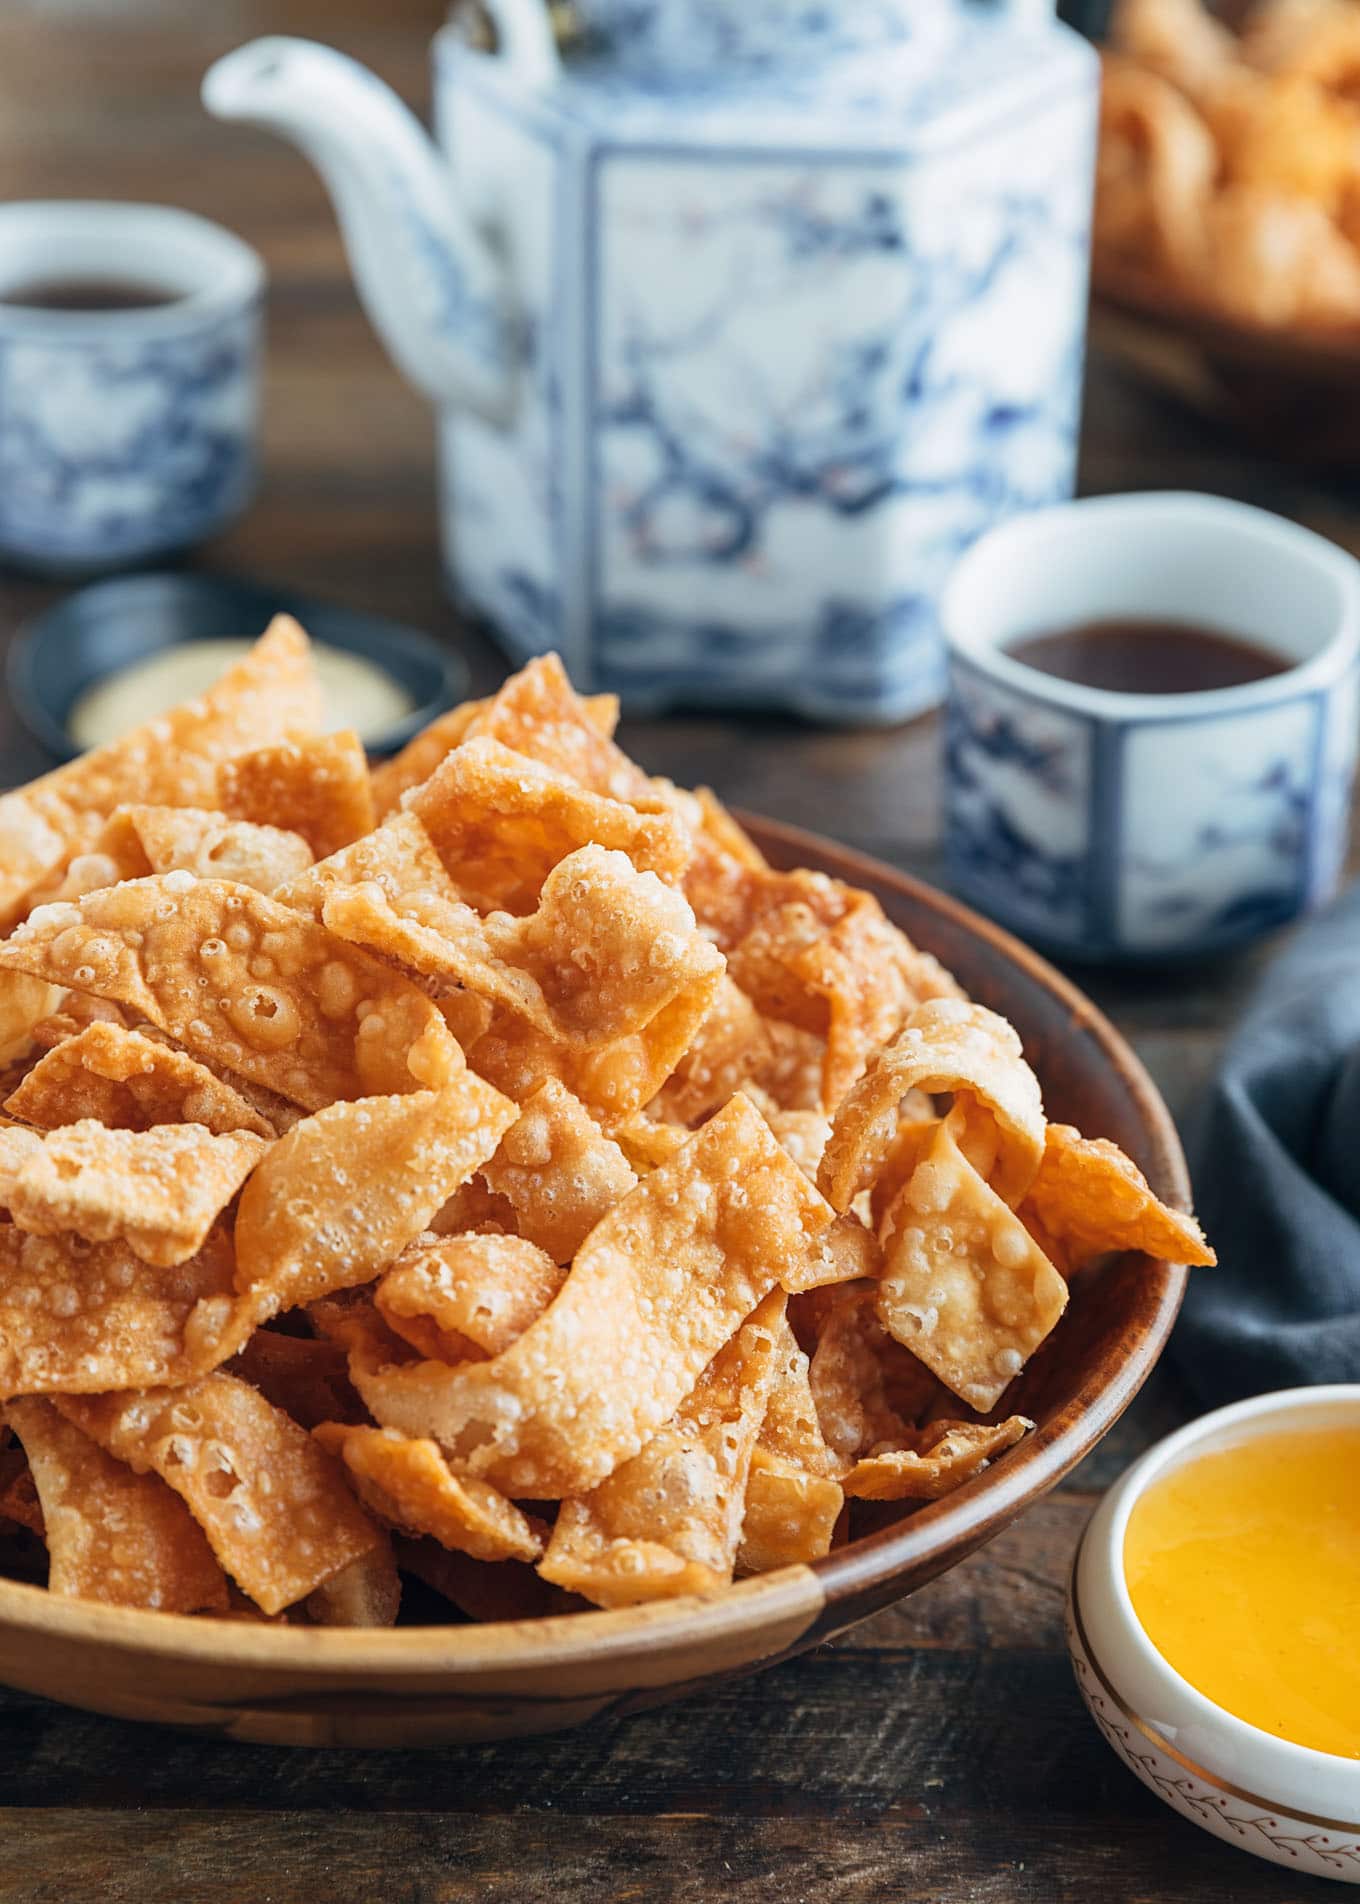 crispy fried wonton strips in a bowl with duck sauce and cups of tea